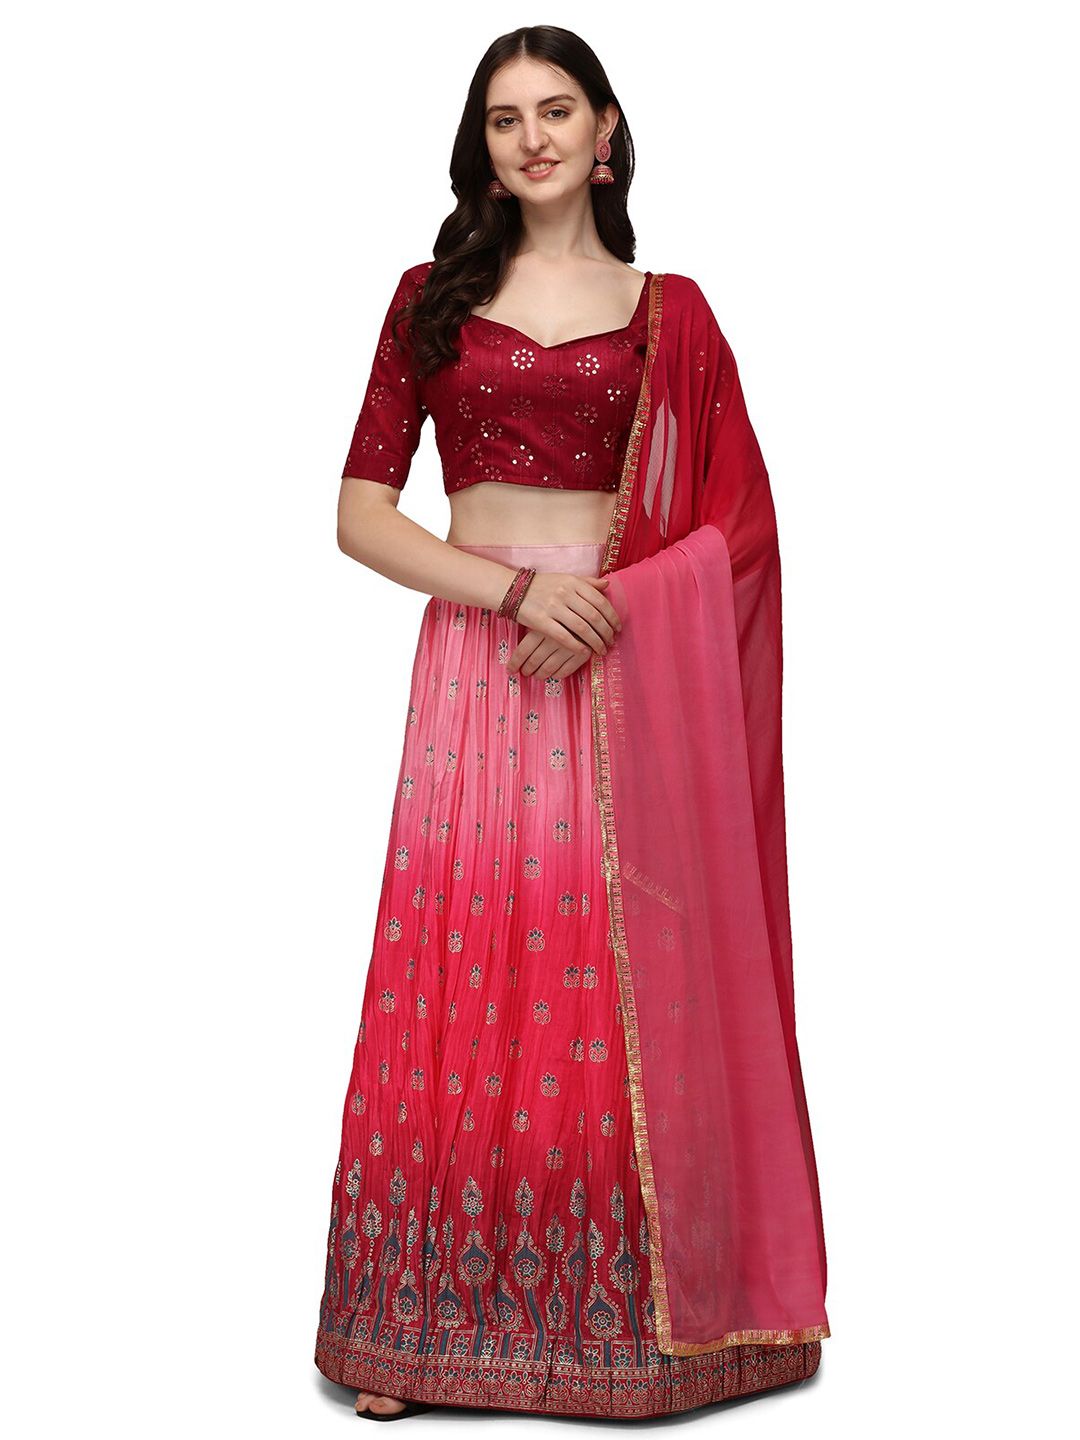 Pratham Blue Pink & Red Embroidered Semi-Stitched Lehenga & Unstitched Blouse With Dupatta Price in India